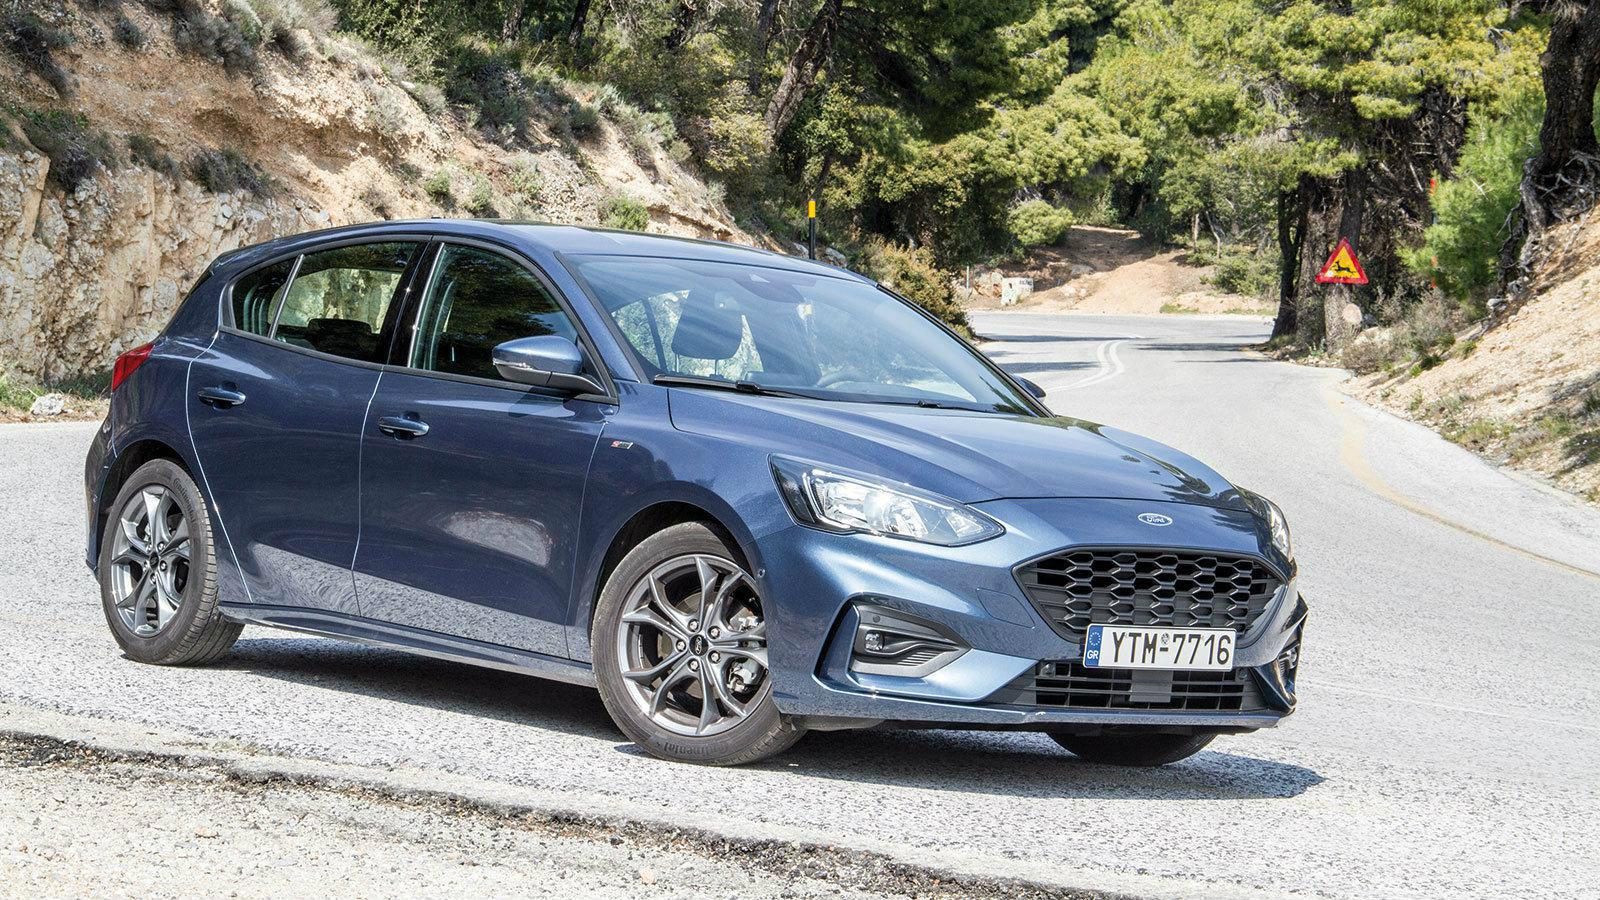 Ford Focus 1.0 Ecoboost 125 PS από 17.894